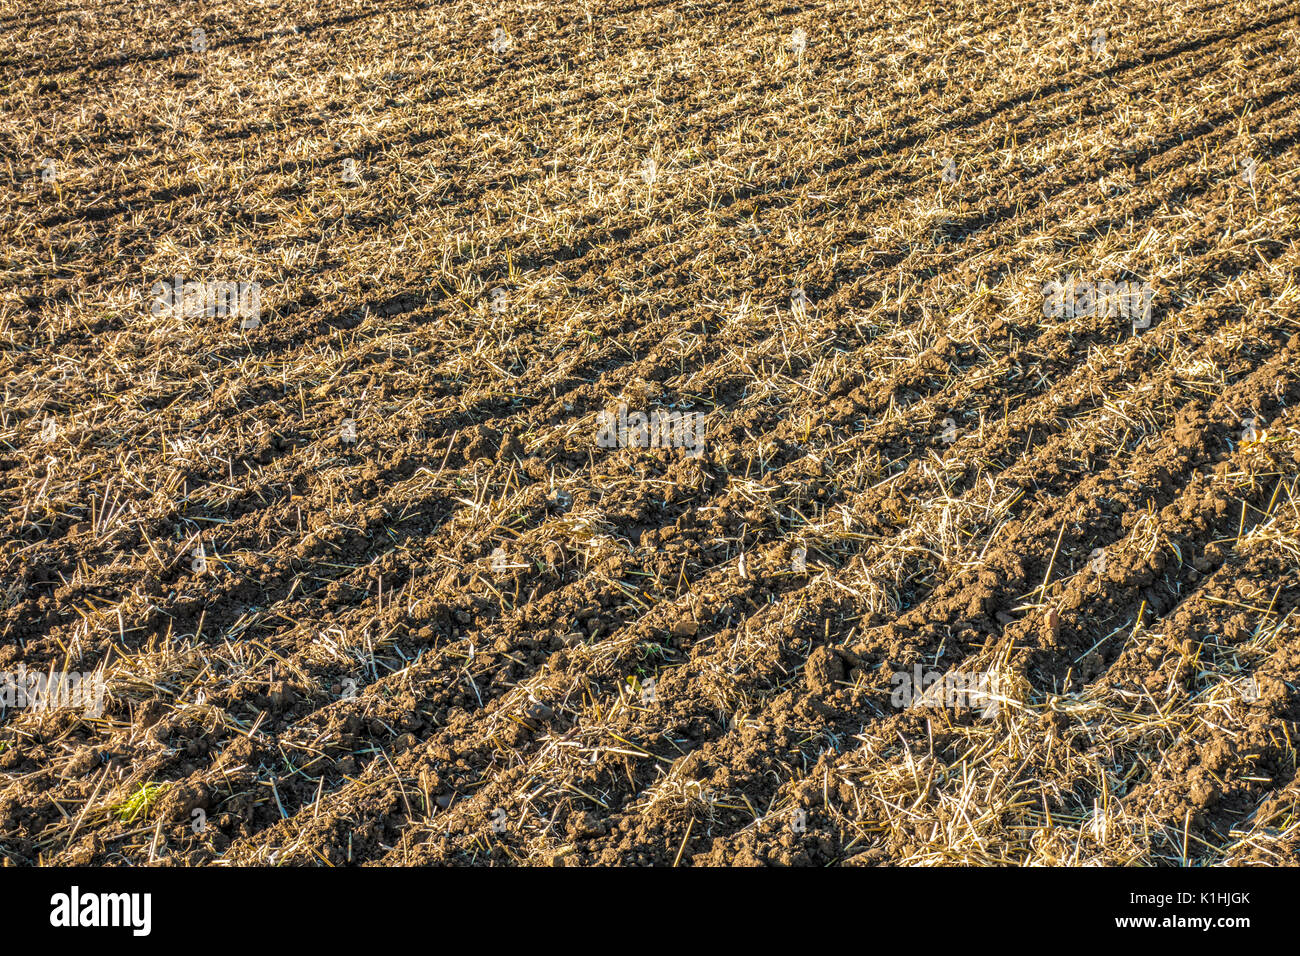 Part of a farm field, after a harvested wheat crop, with turned over soil / earth at the end of the growing season. England, UK. Stock Photo